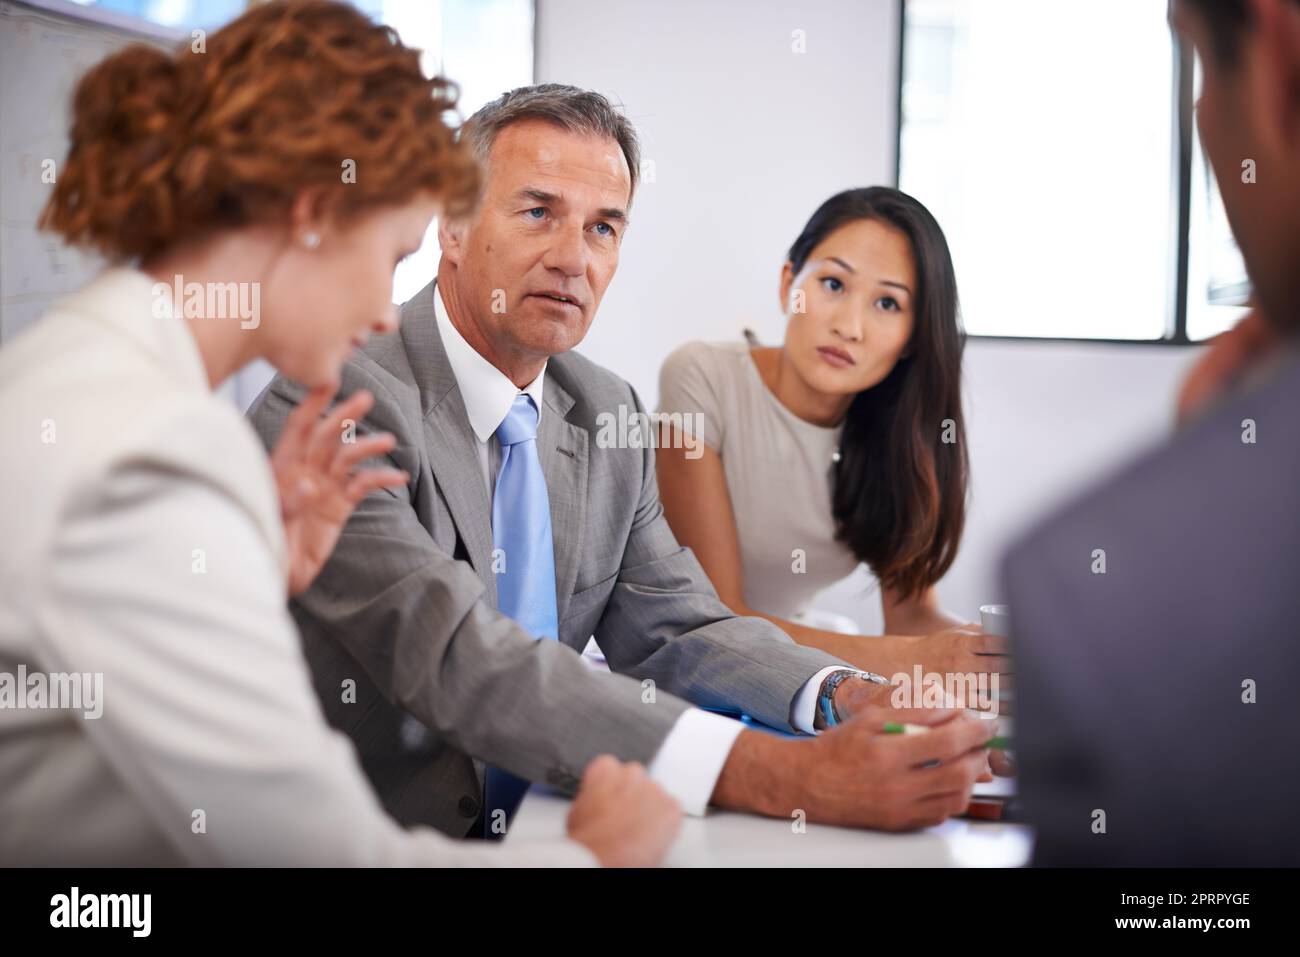 The deadline is looming. a group of businesspeople in a meeting. Stock Photo